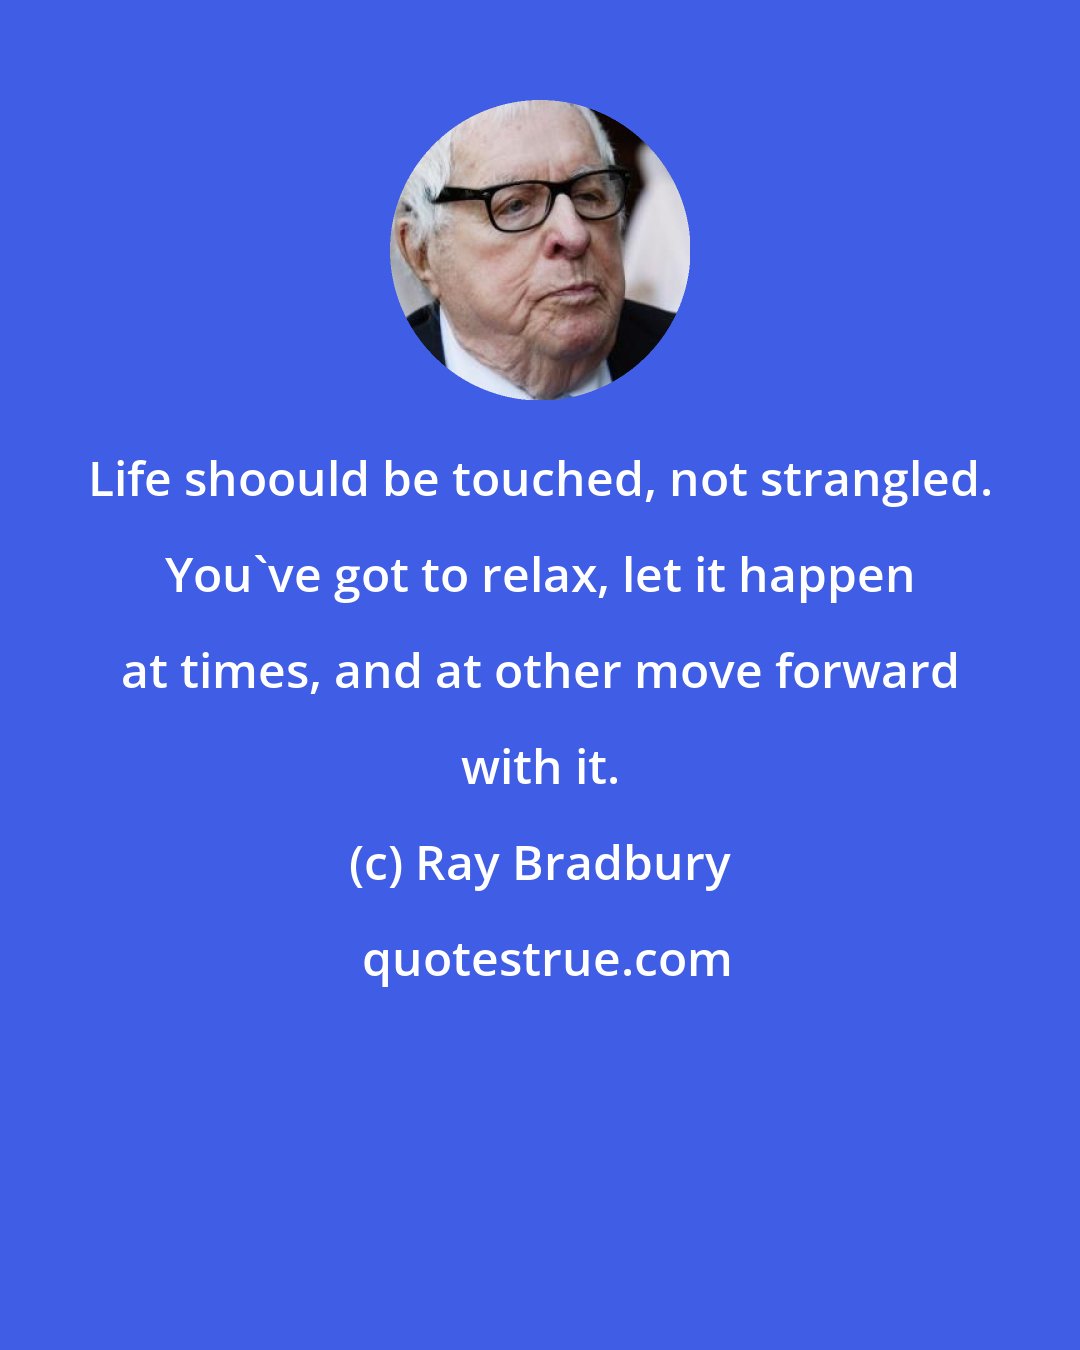 Ray Bradbury: Life shoould be touched, not strangled. You've got to relax, let it happen at times, and at other move forward with it.